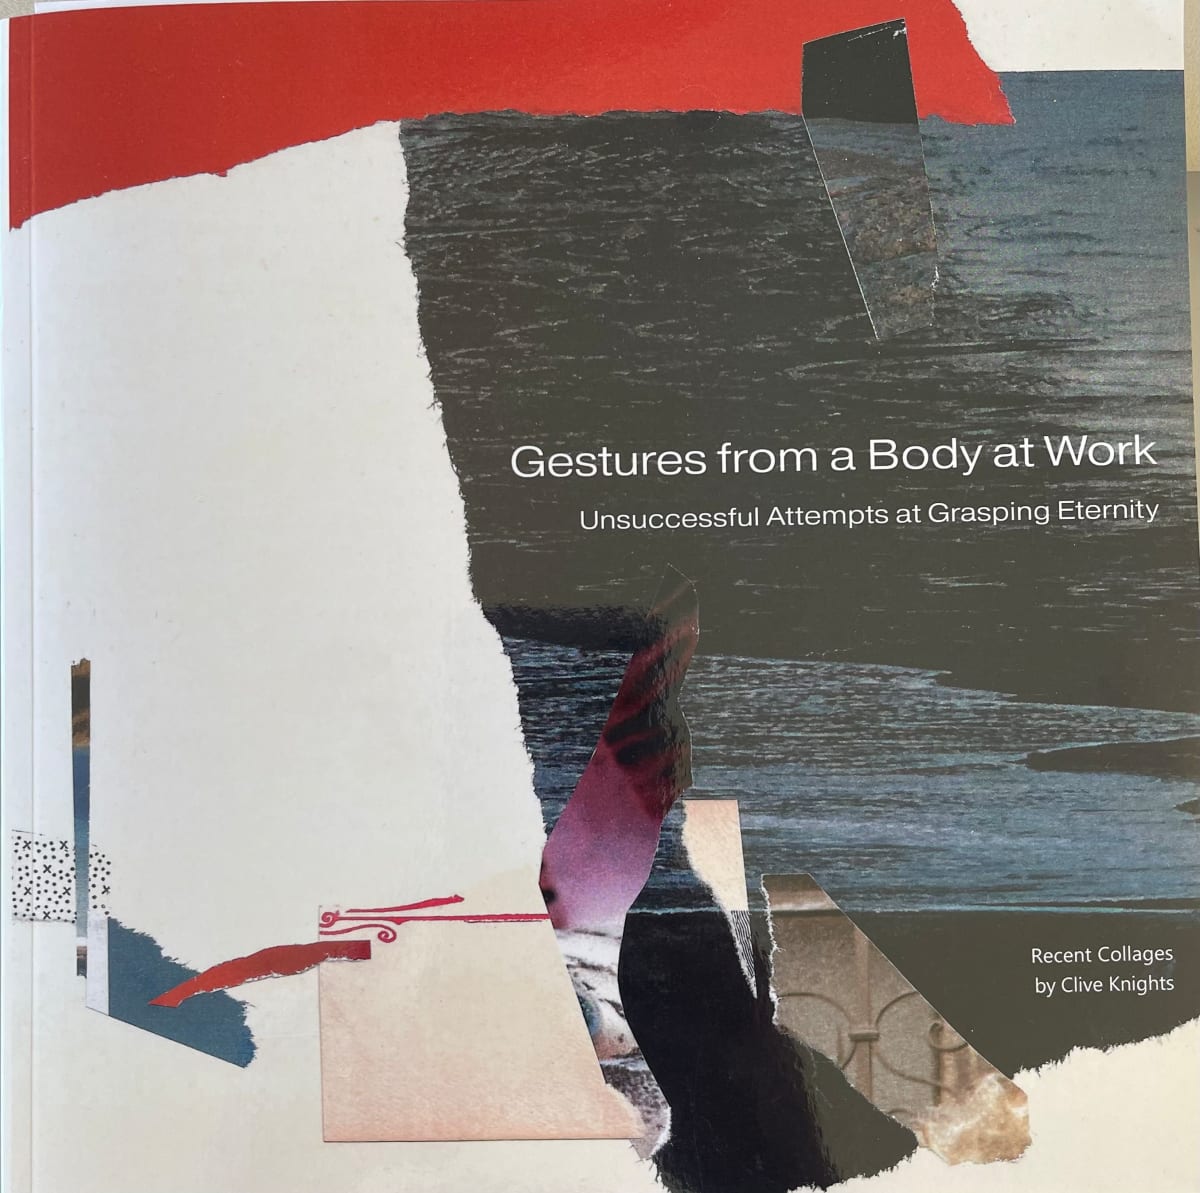 Gestures from a Body of Work, Unsuccessful Attempts at Grasping Eternity by Clive Knights  Image: Gestures from a Body of Work, Unsuccessful Attempts at Grasping Eternity, Book of Collage by Clive Knights